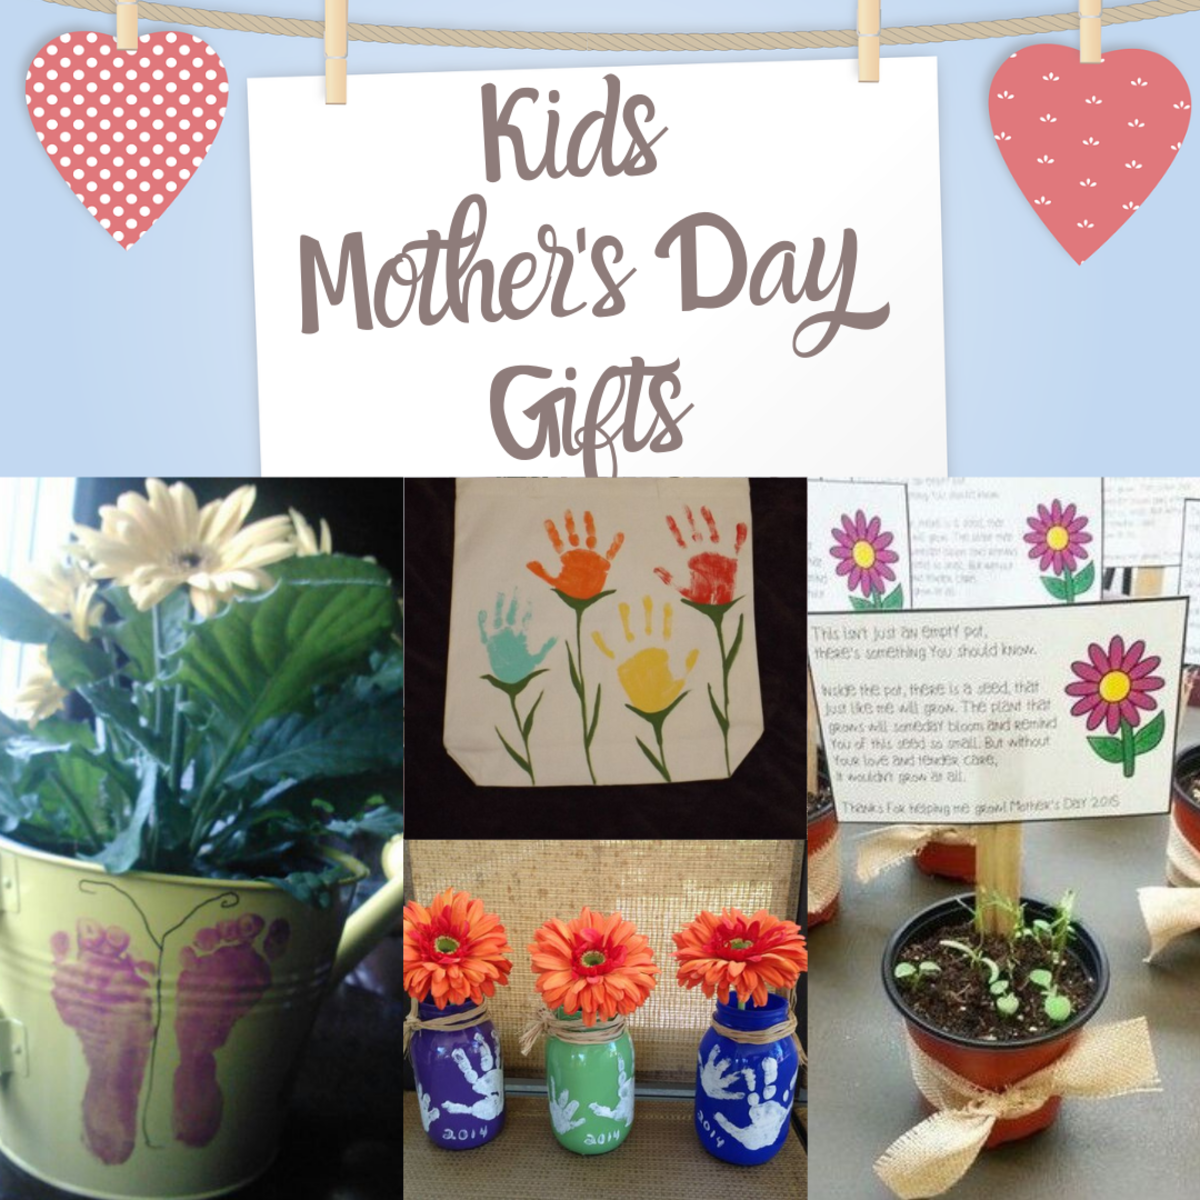 Get the kids busy crafting to celebrate Mom this year! These gift ideas are all easy DIY projects.